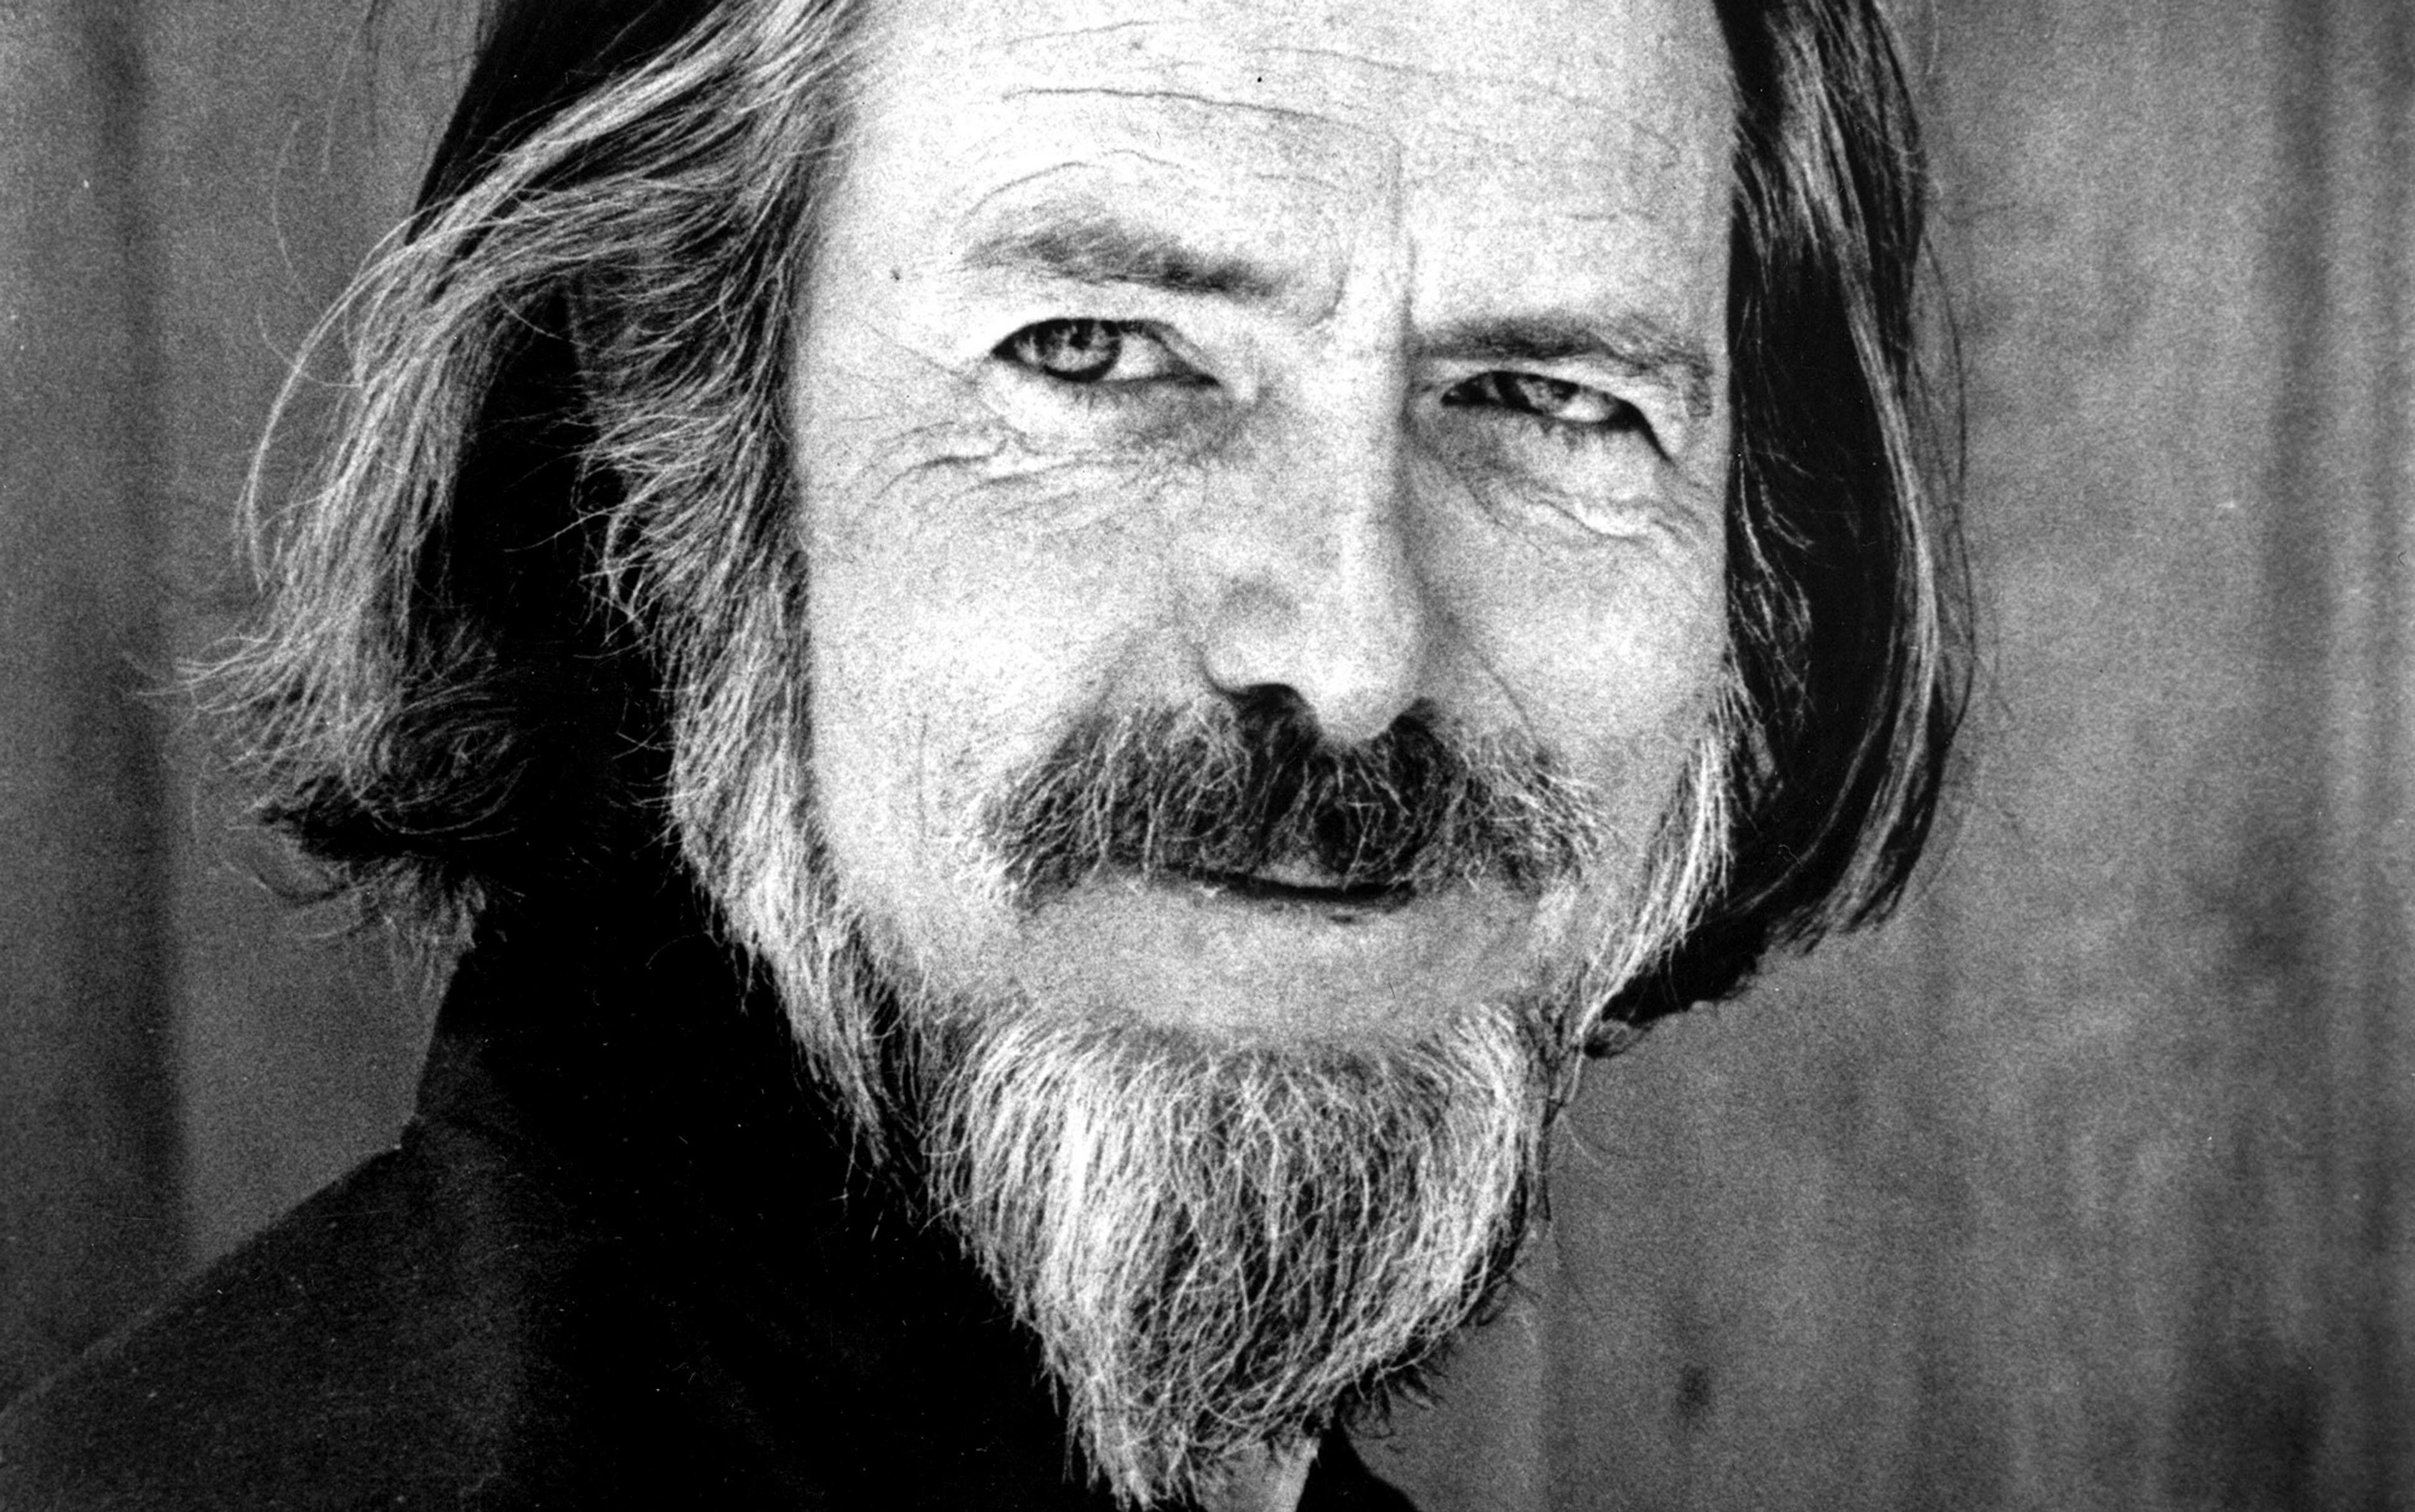 Close-up of a man with a long beard and shoulder-length hair, smiling slightly with a contemplative expression, black and white photograph.